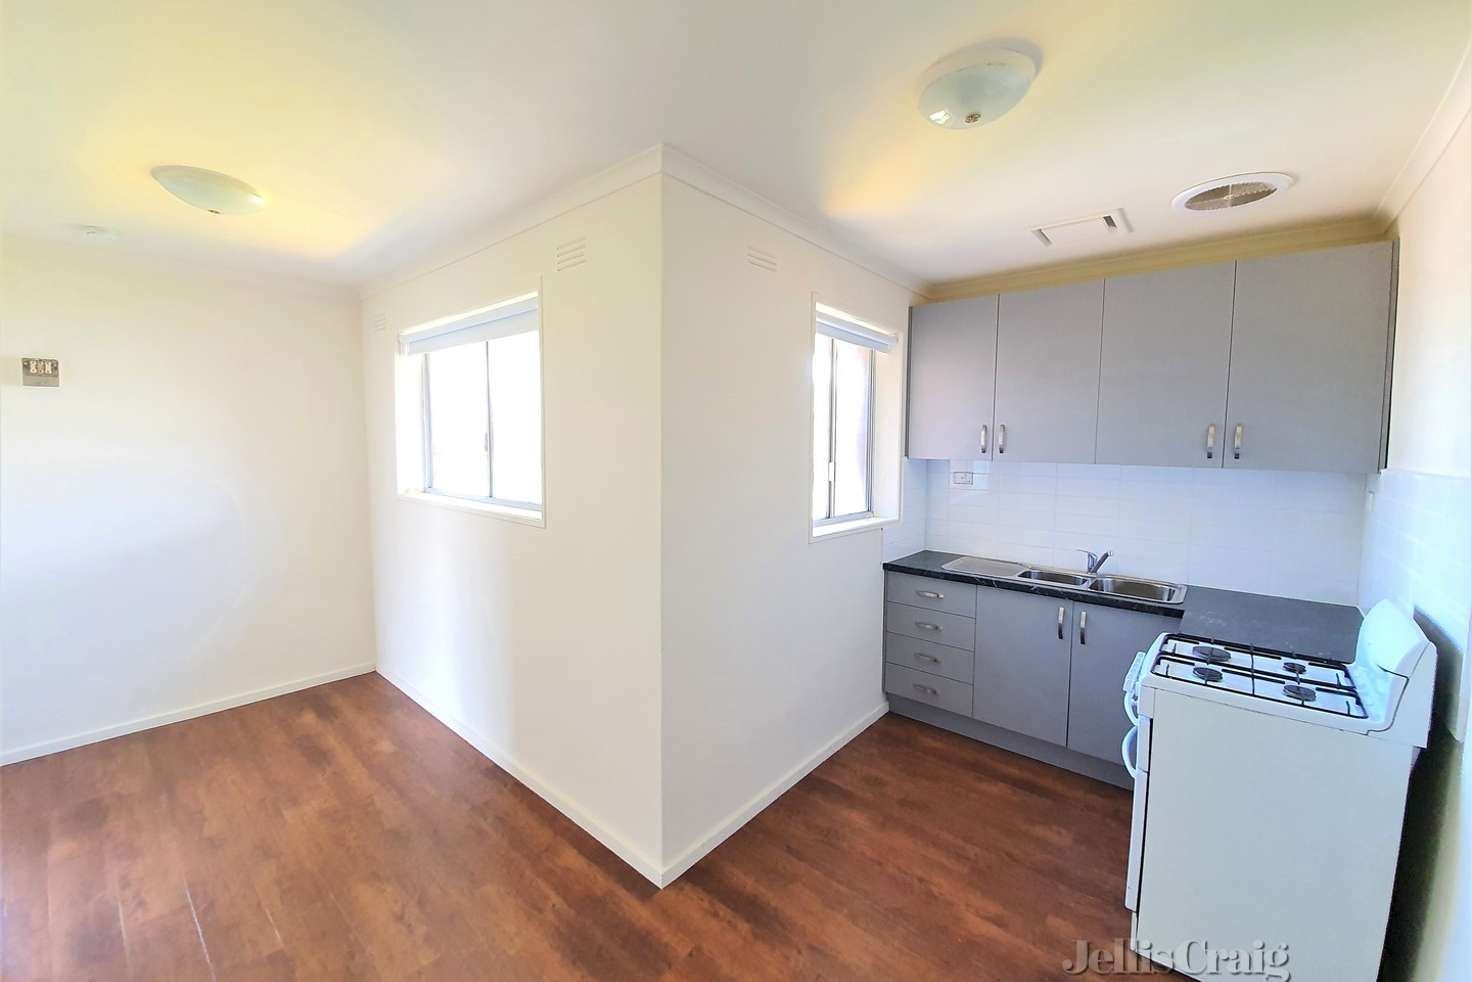 Main view of Homely apartment listing, 5/41 Pender Street, Thornbury VIC 3071